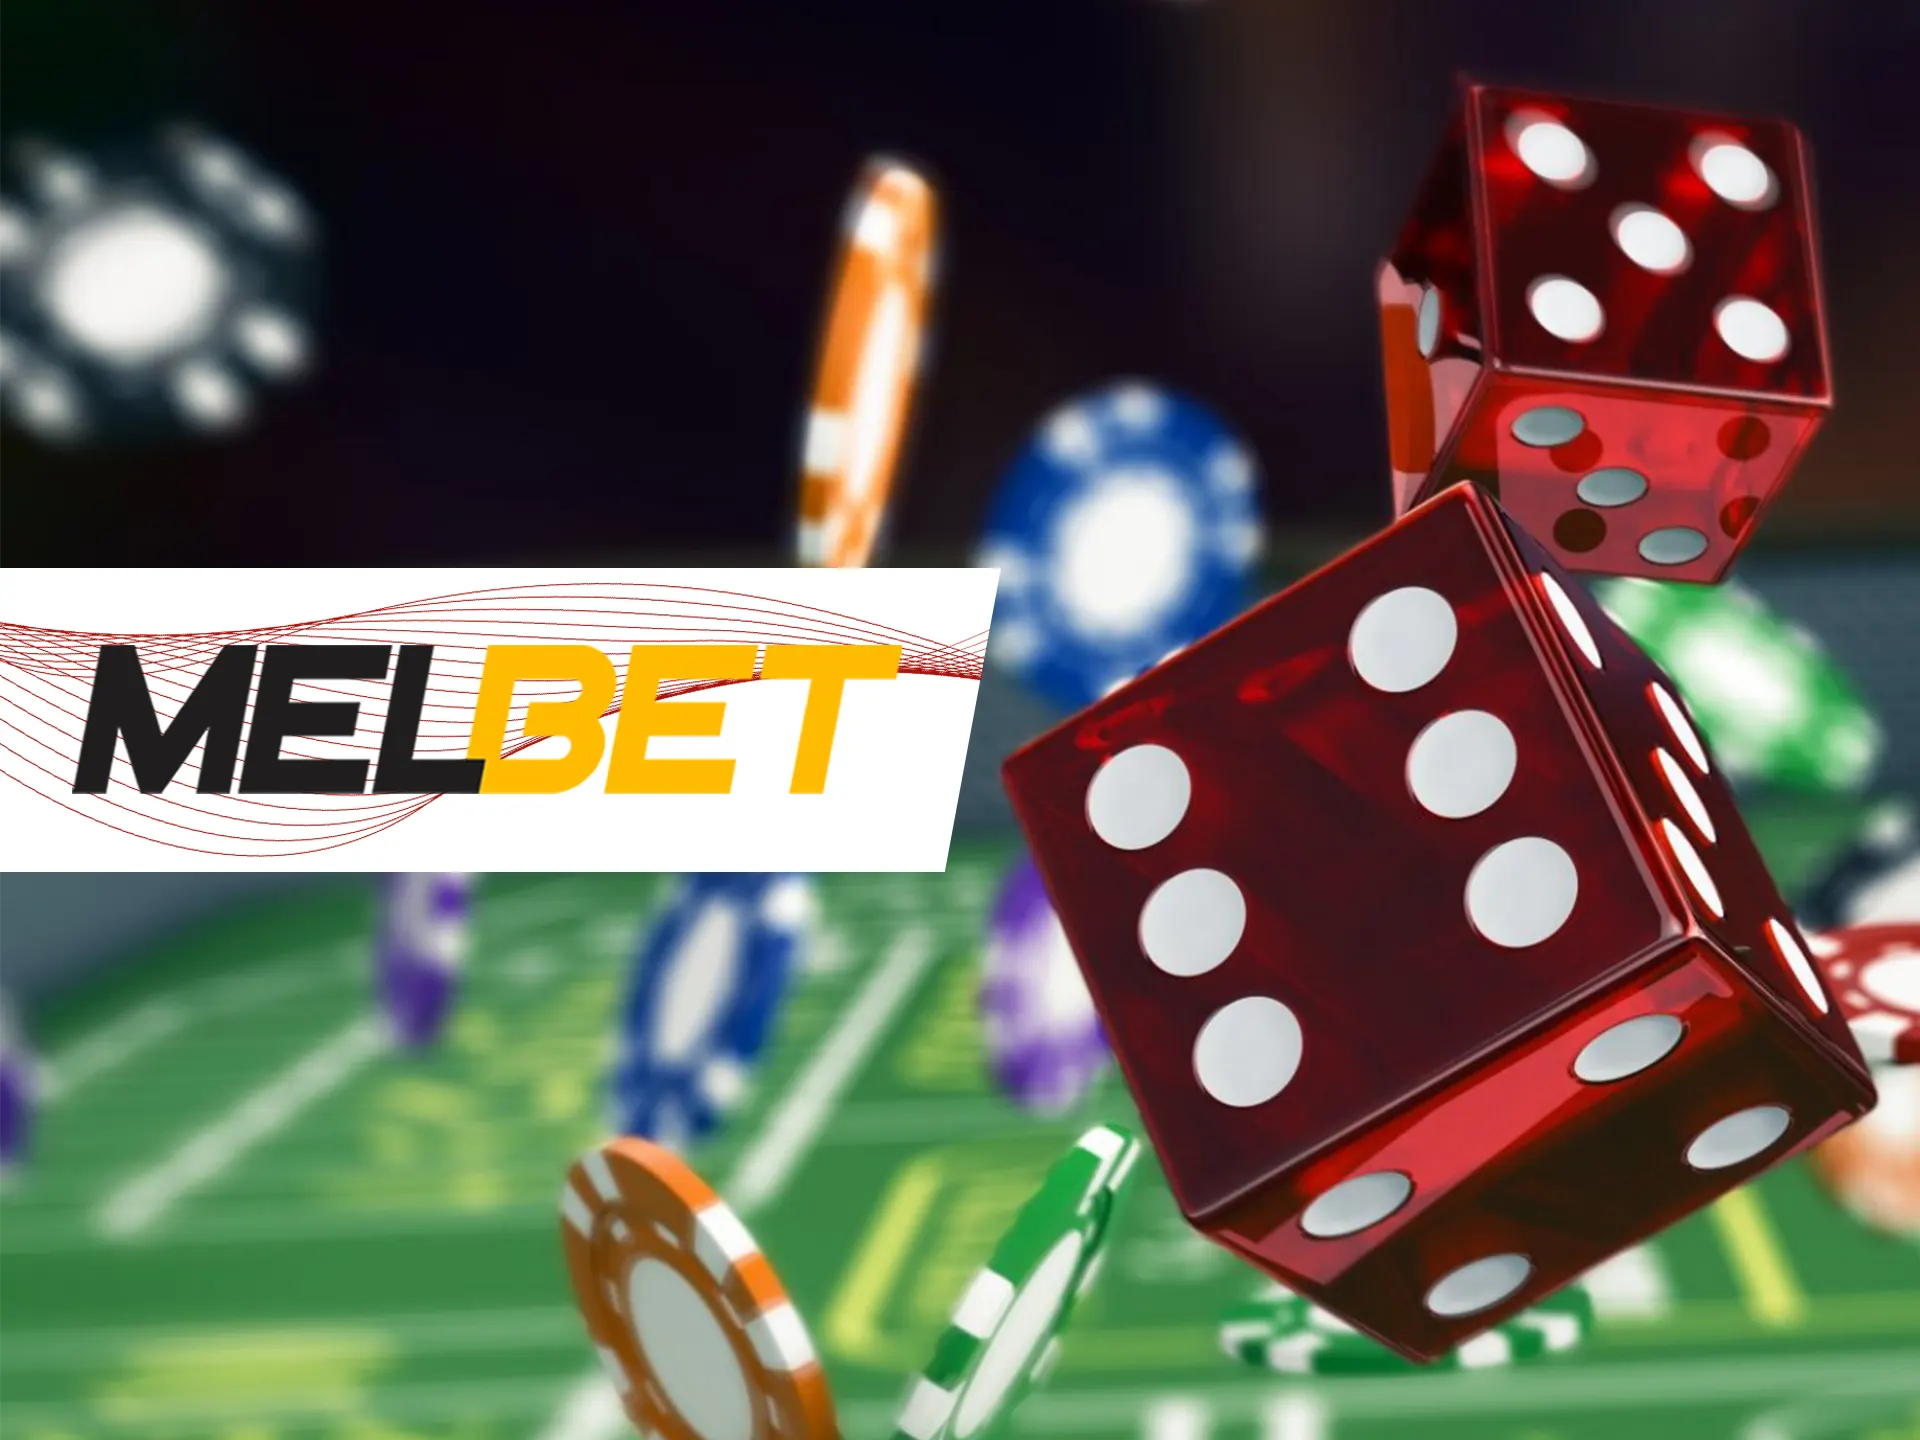 Melbet is a best betting company to bet at.